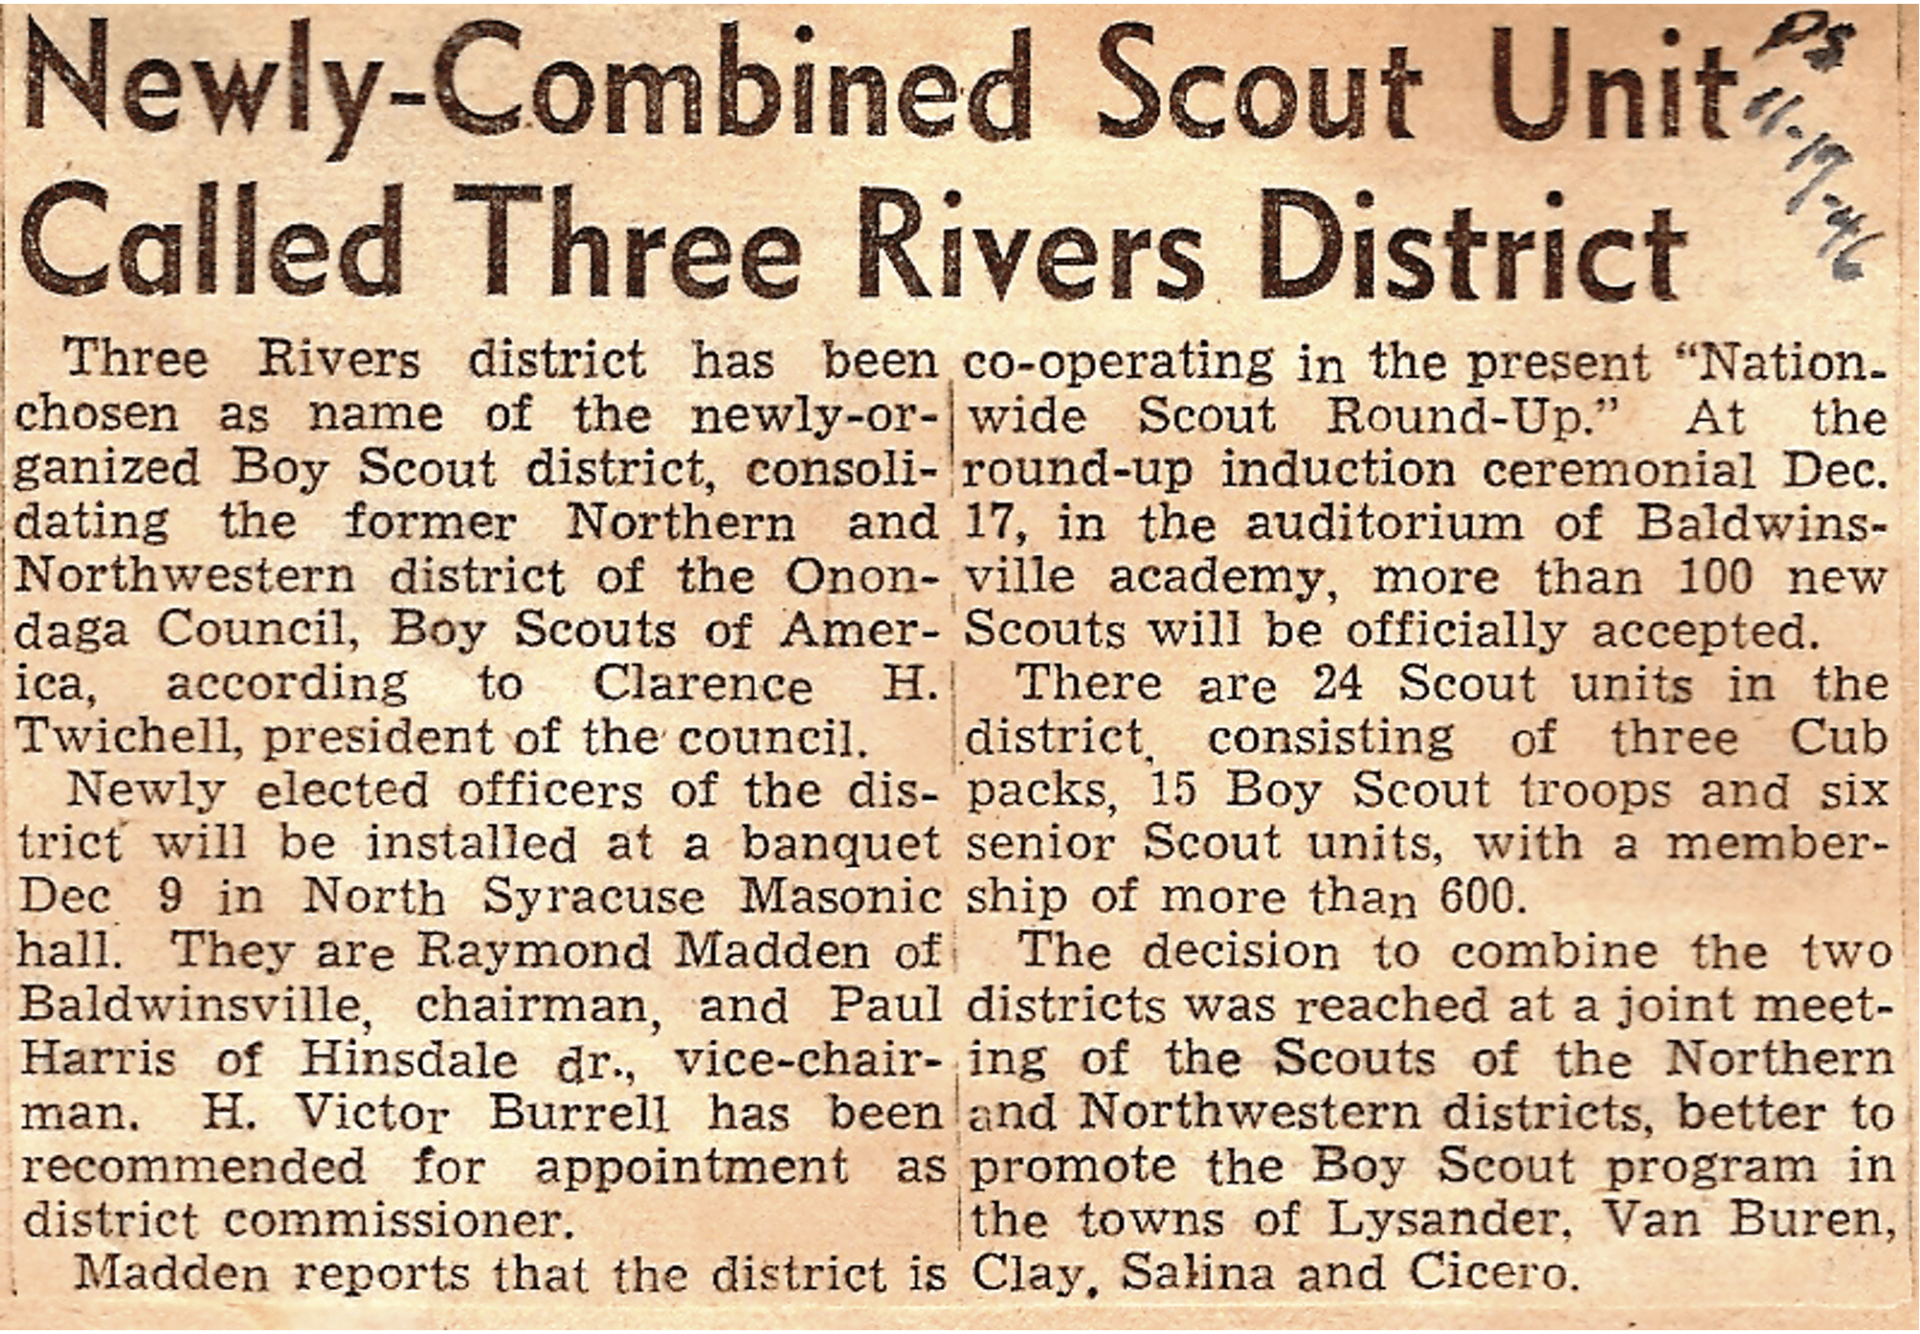 Newspaper clipping titled 'Newly-Combined Scout Unit Called Three Rivers District